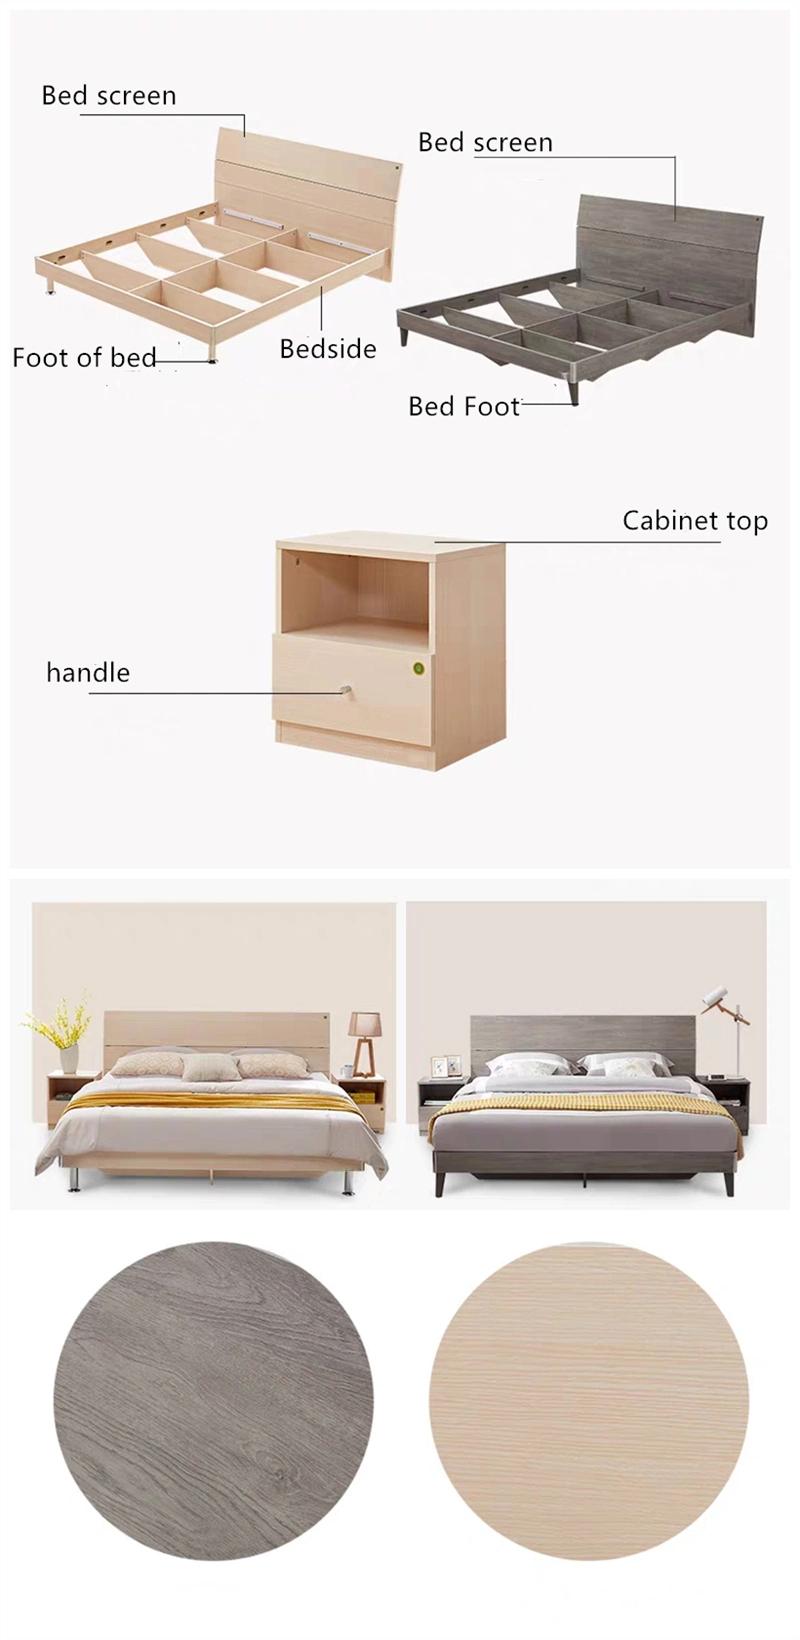 Hot Sale Chinese Modern Home Hotel Bedroom Furniture Double King Size Wall Bunk Sofa Bed